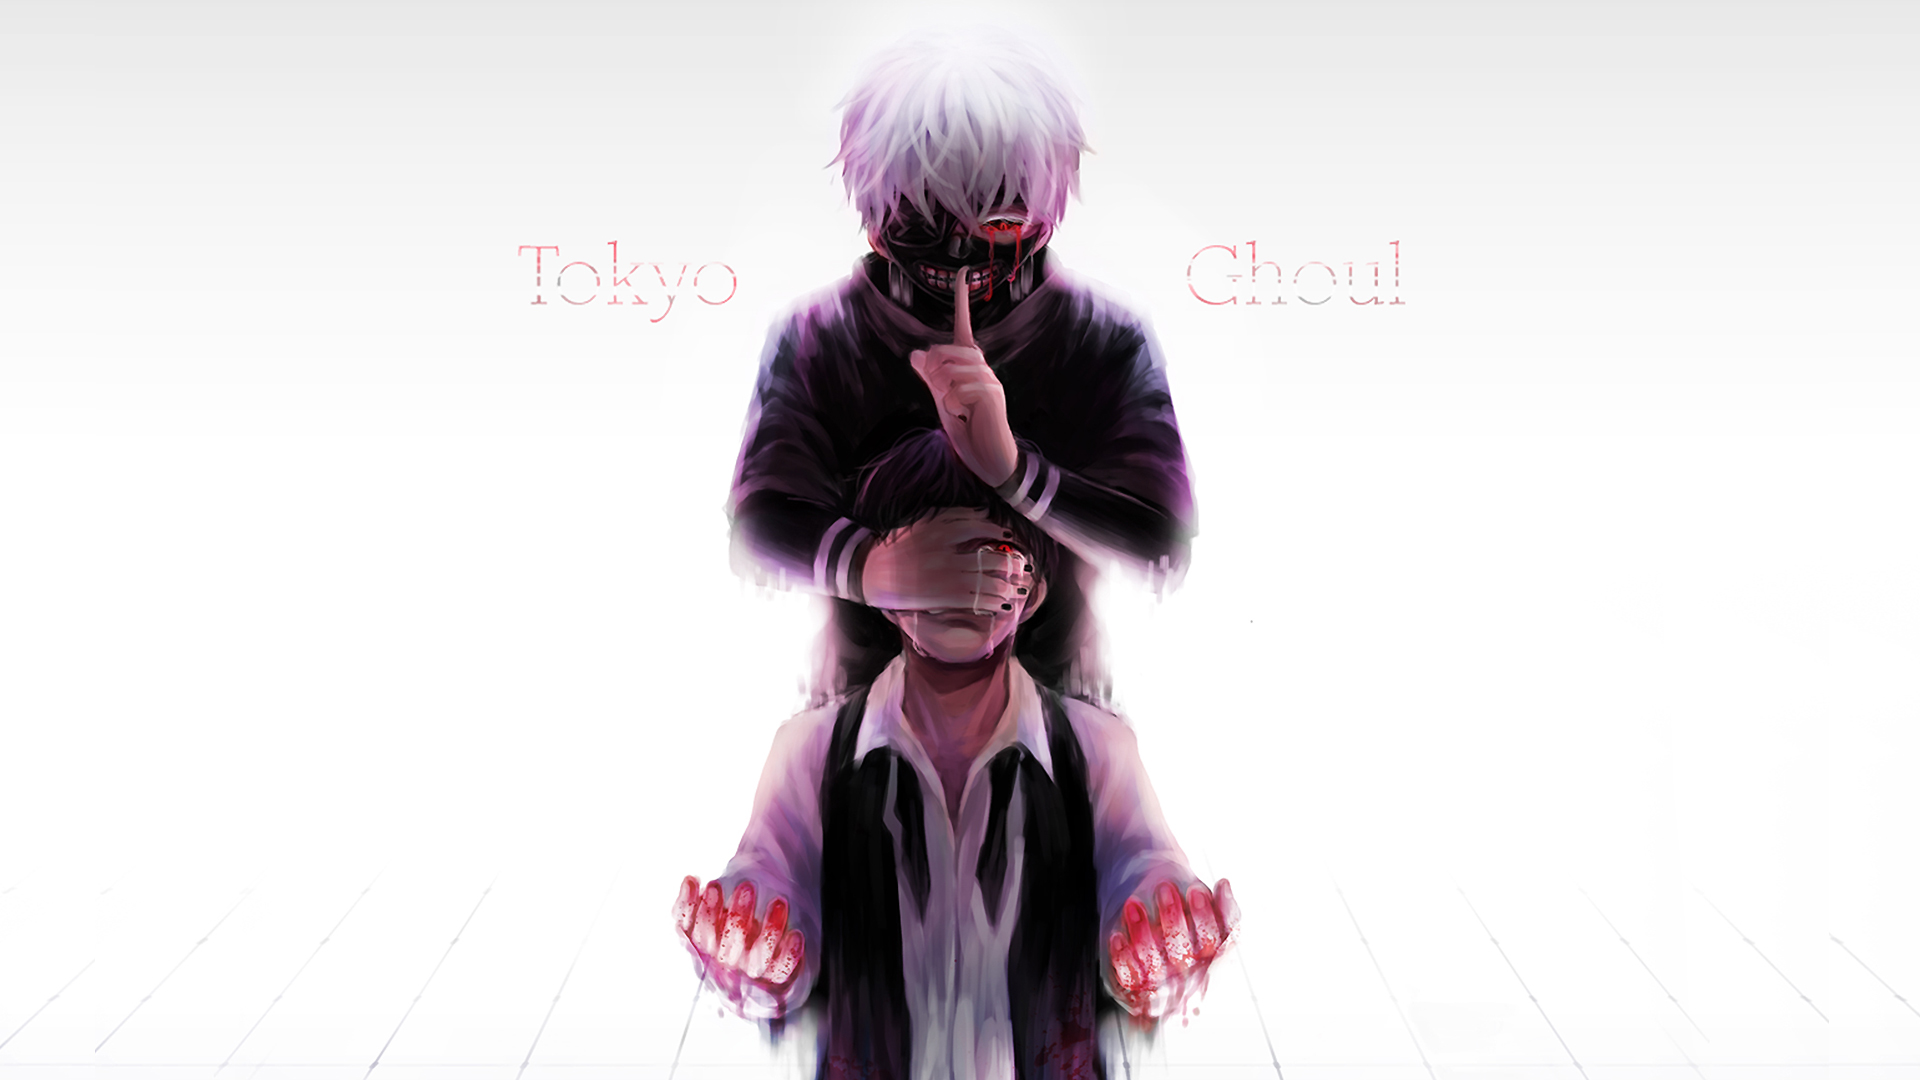 Tokyo Ghoul Wallpaper High Quality HD [414] - HD Wallpaper Backgrounds